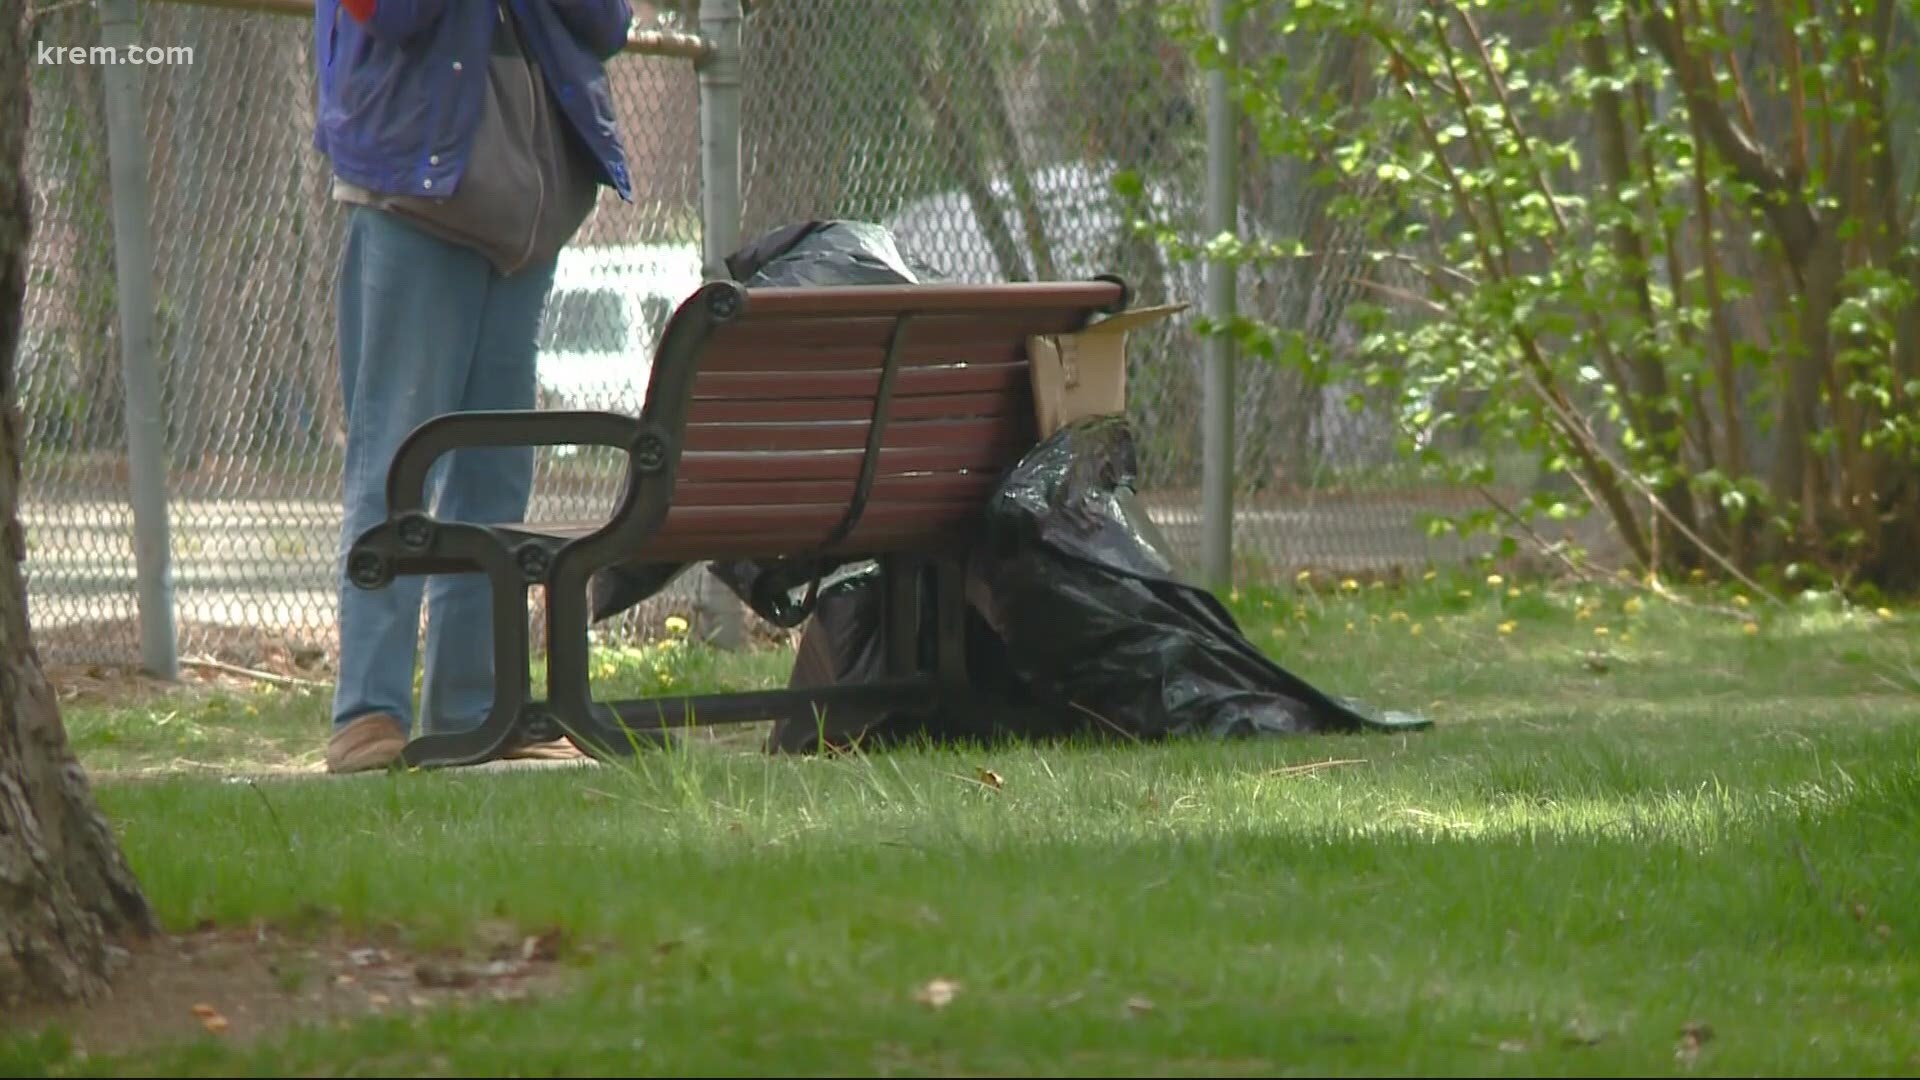 The CDC says people experiencing homeless are particularly vulnerable when it comes getting COVID-19.